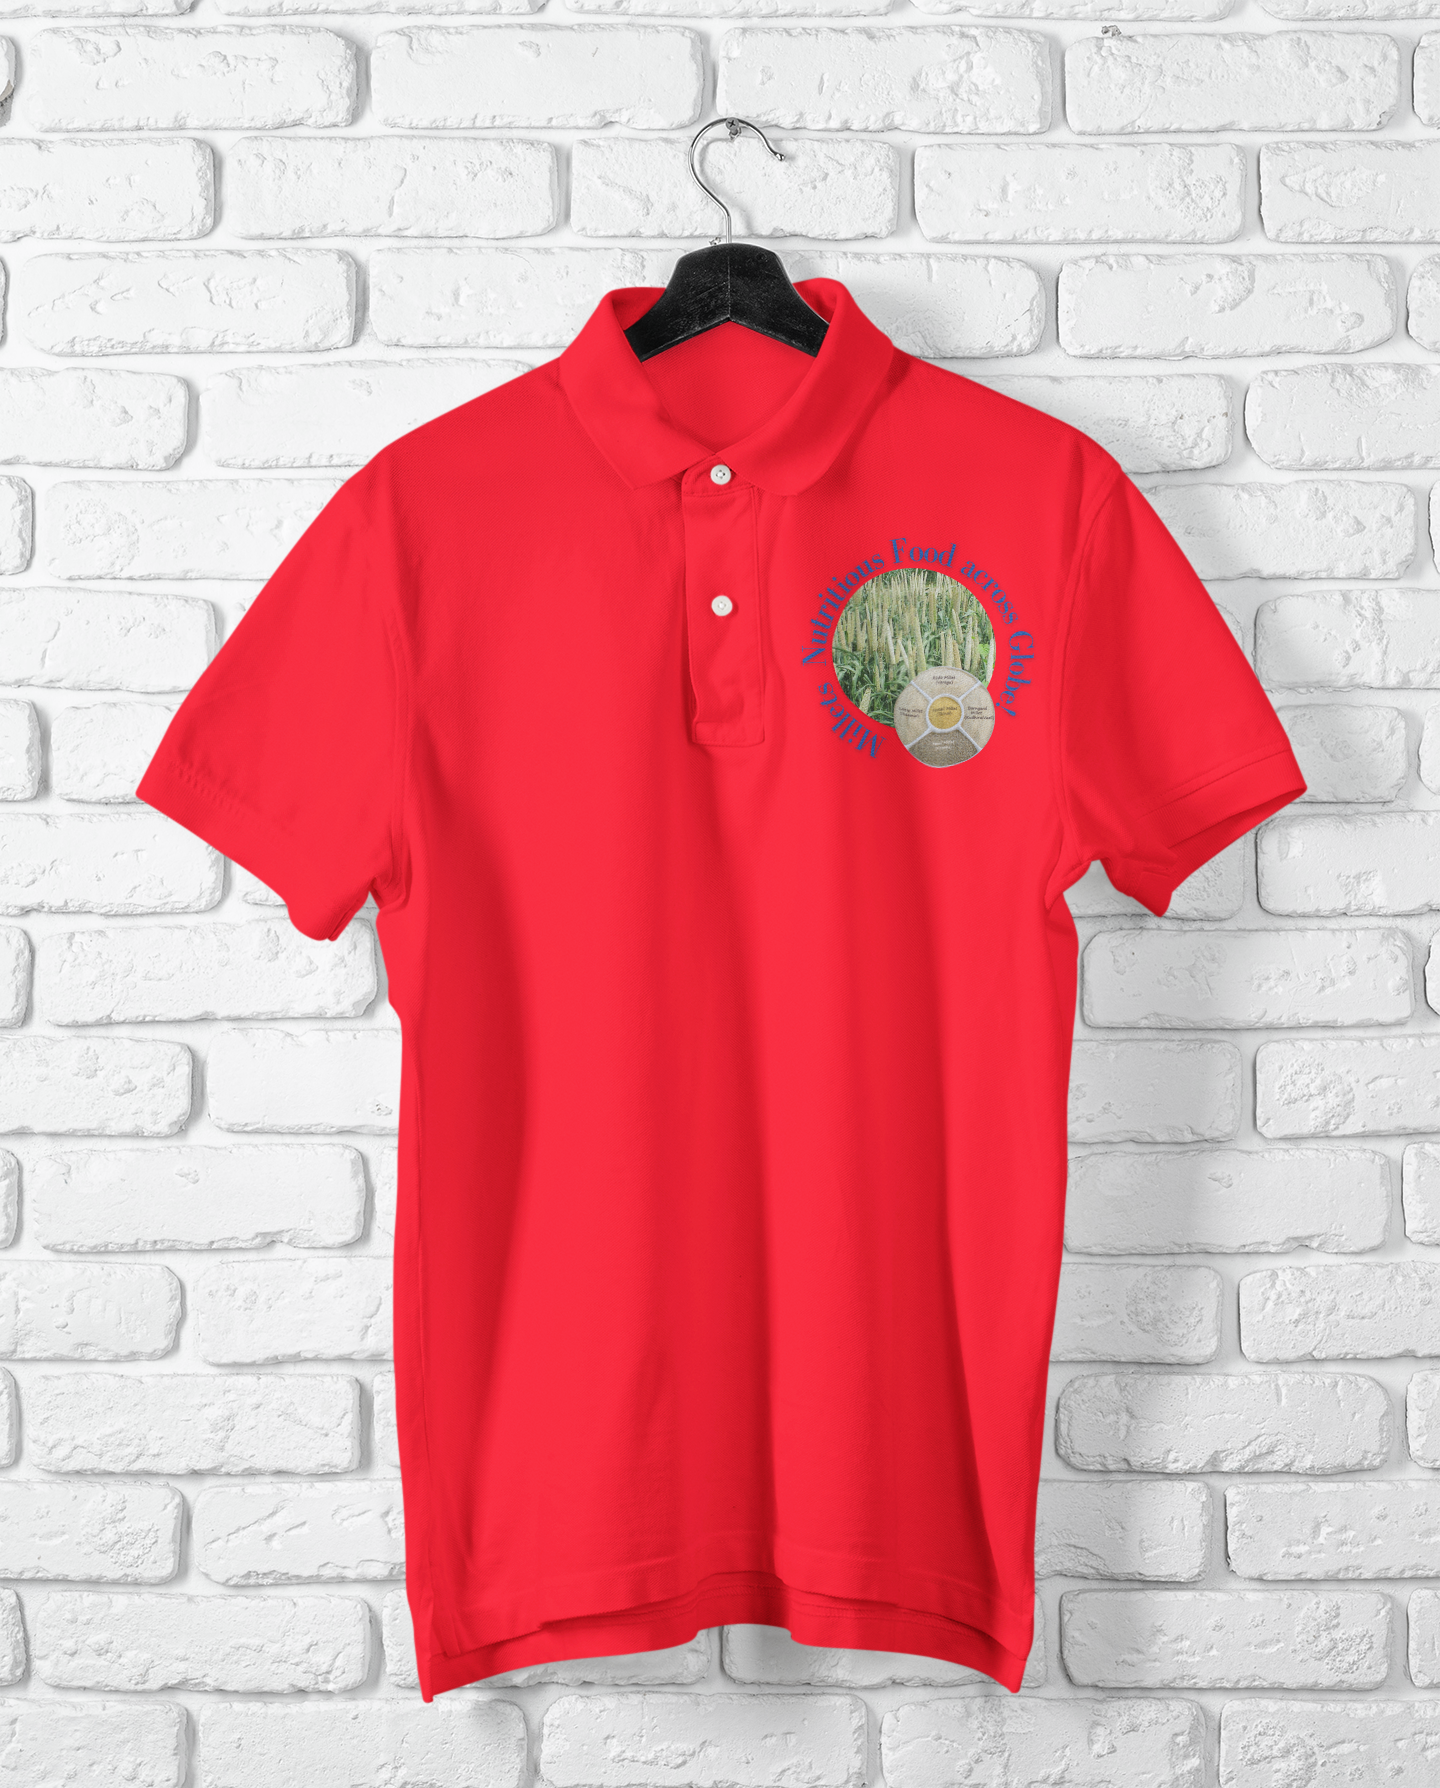 Natural Food In Agricultural POLO T SHIRT